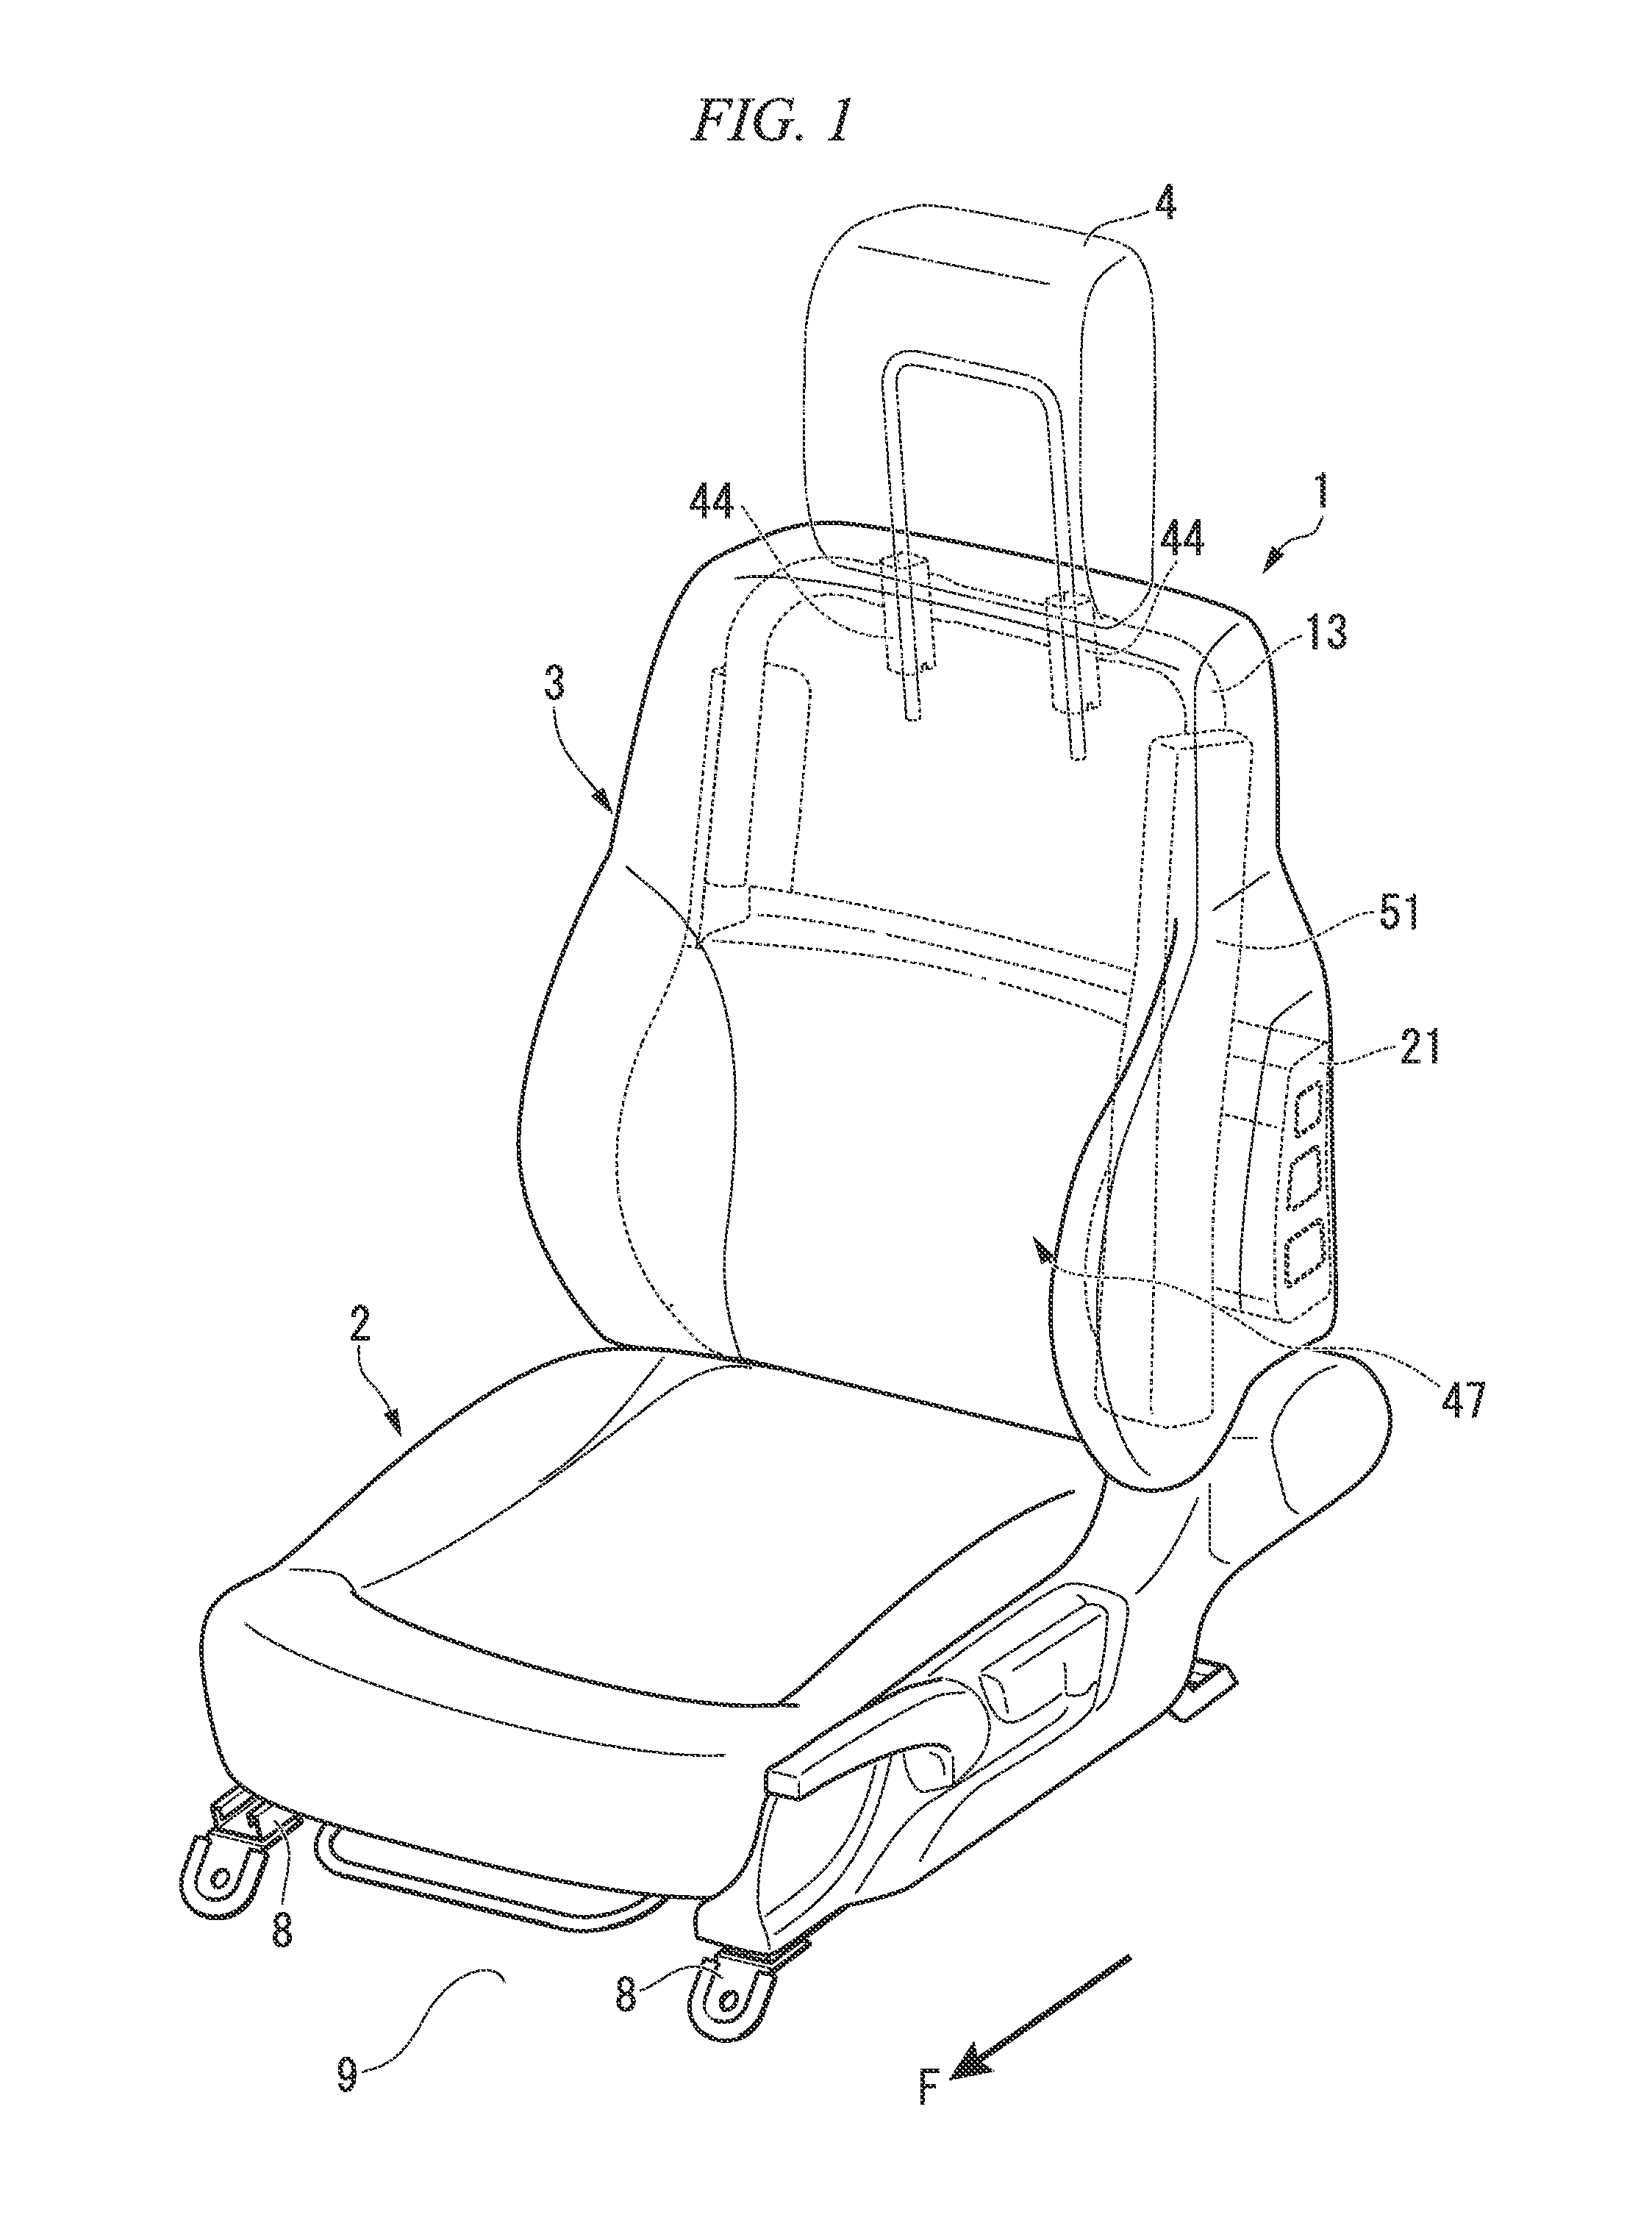 Seat back frame for vehicle seat